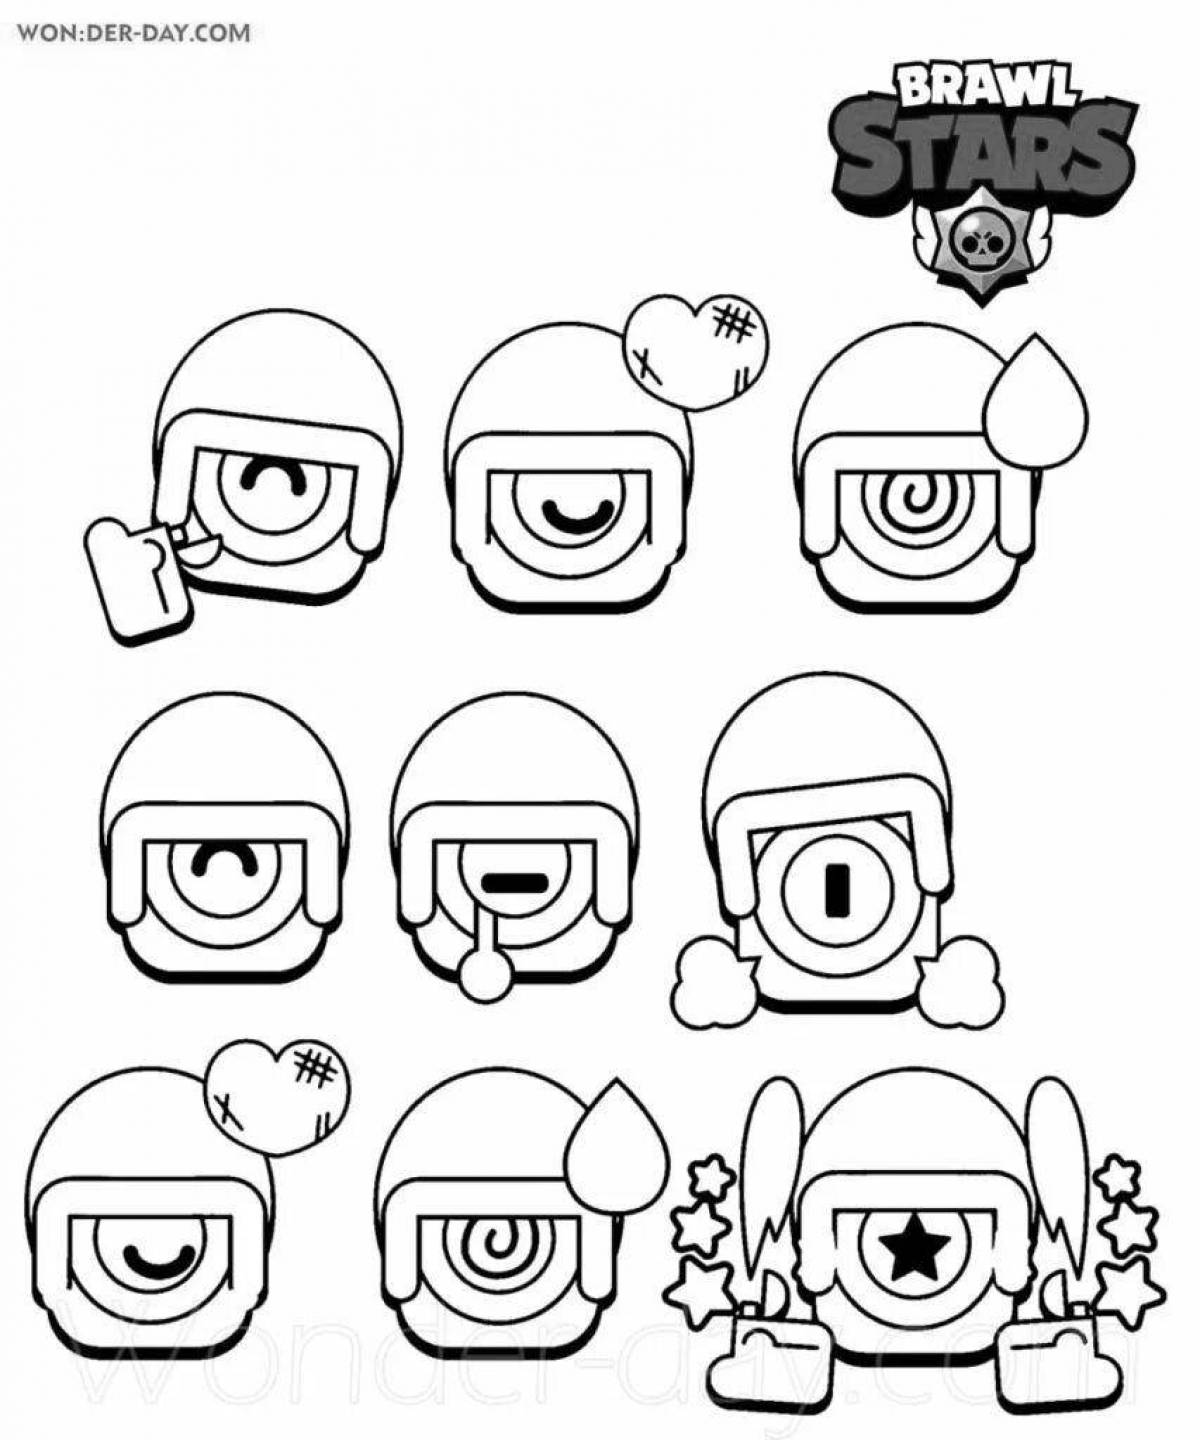 Adorable coloring icons from brawl stars